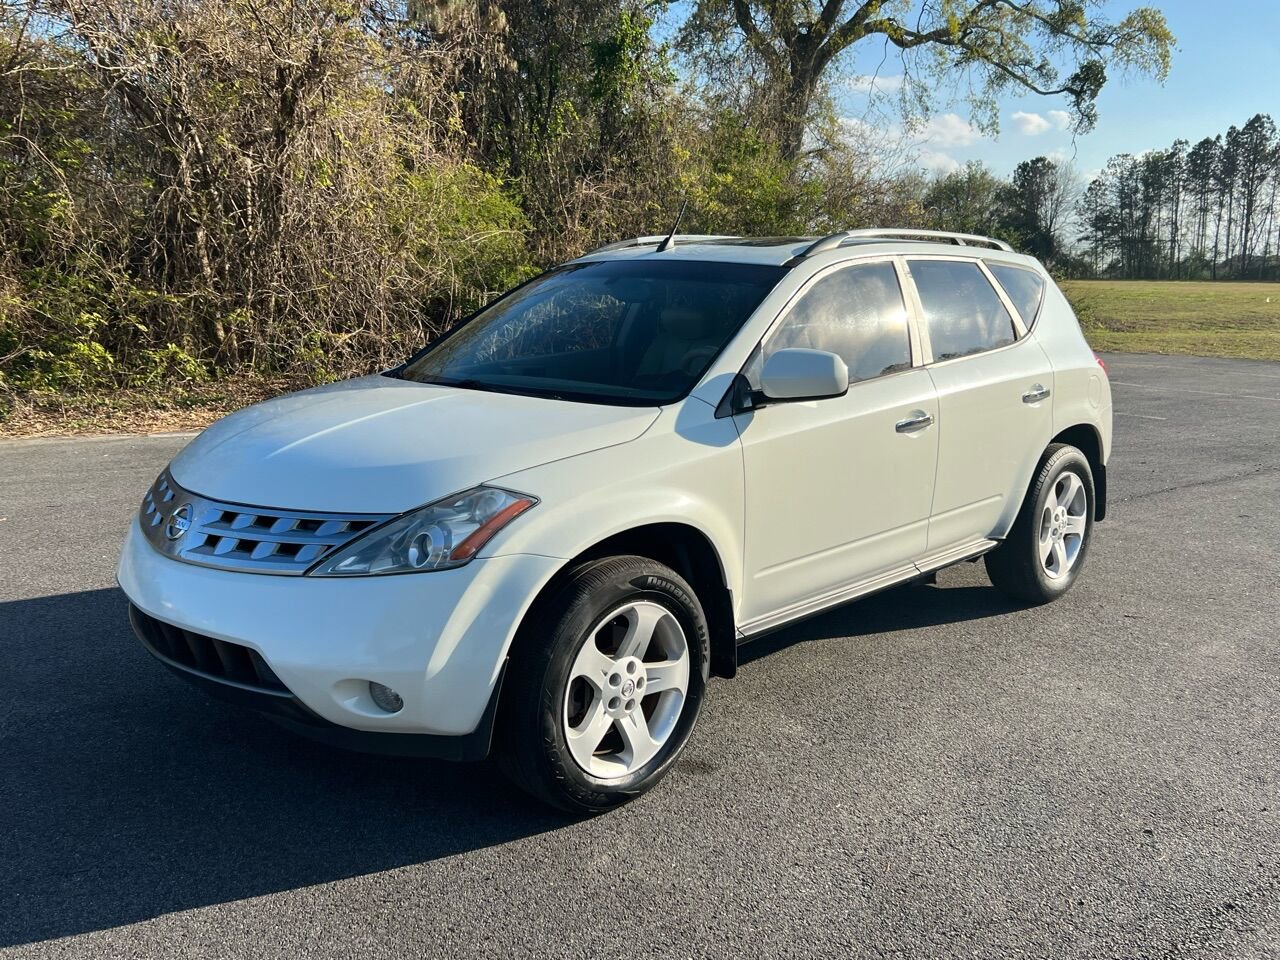 Used 2004 Nissan Murano for Sale Right Now - Autotrader